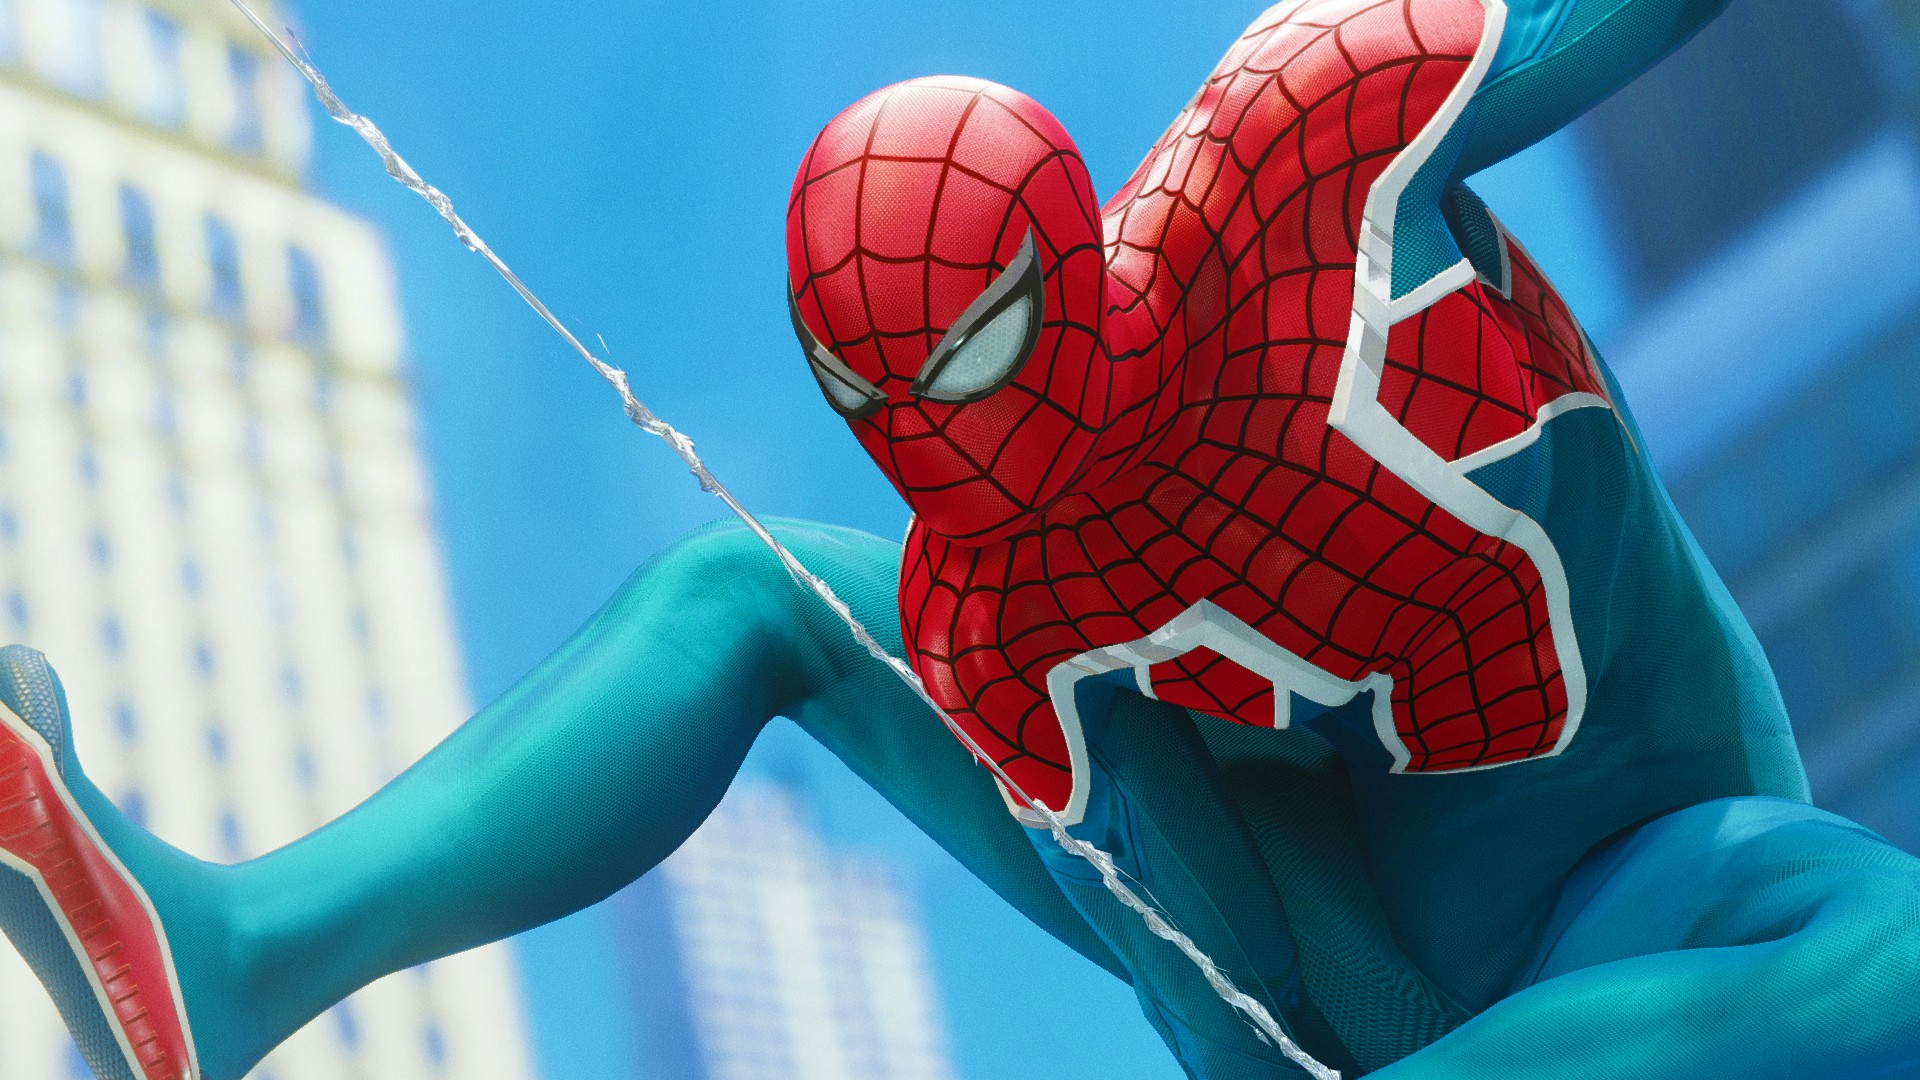 Spider-Man PC mod lets you fight crime as the grave of Uncle Ben | PCGamesN